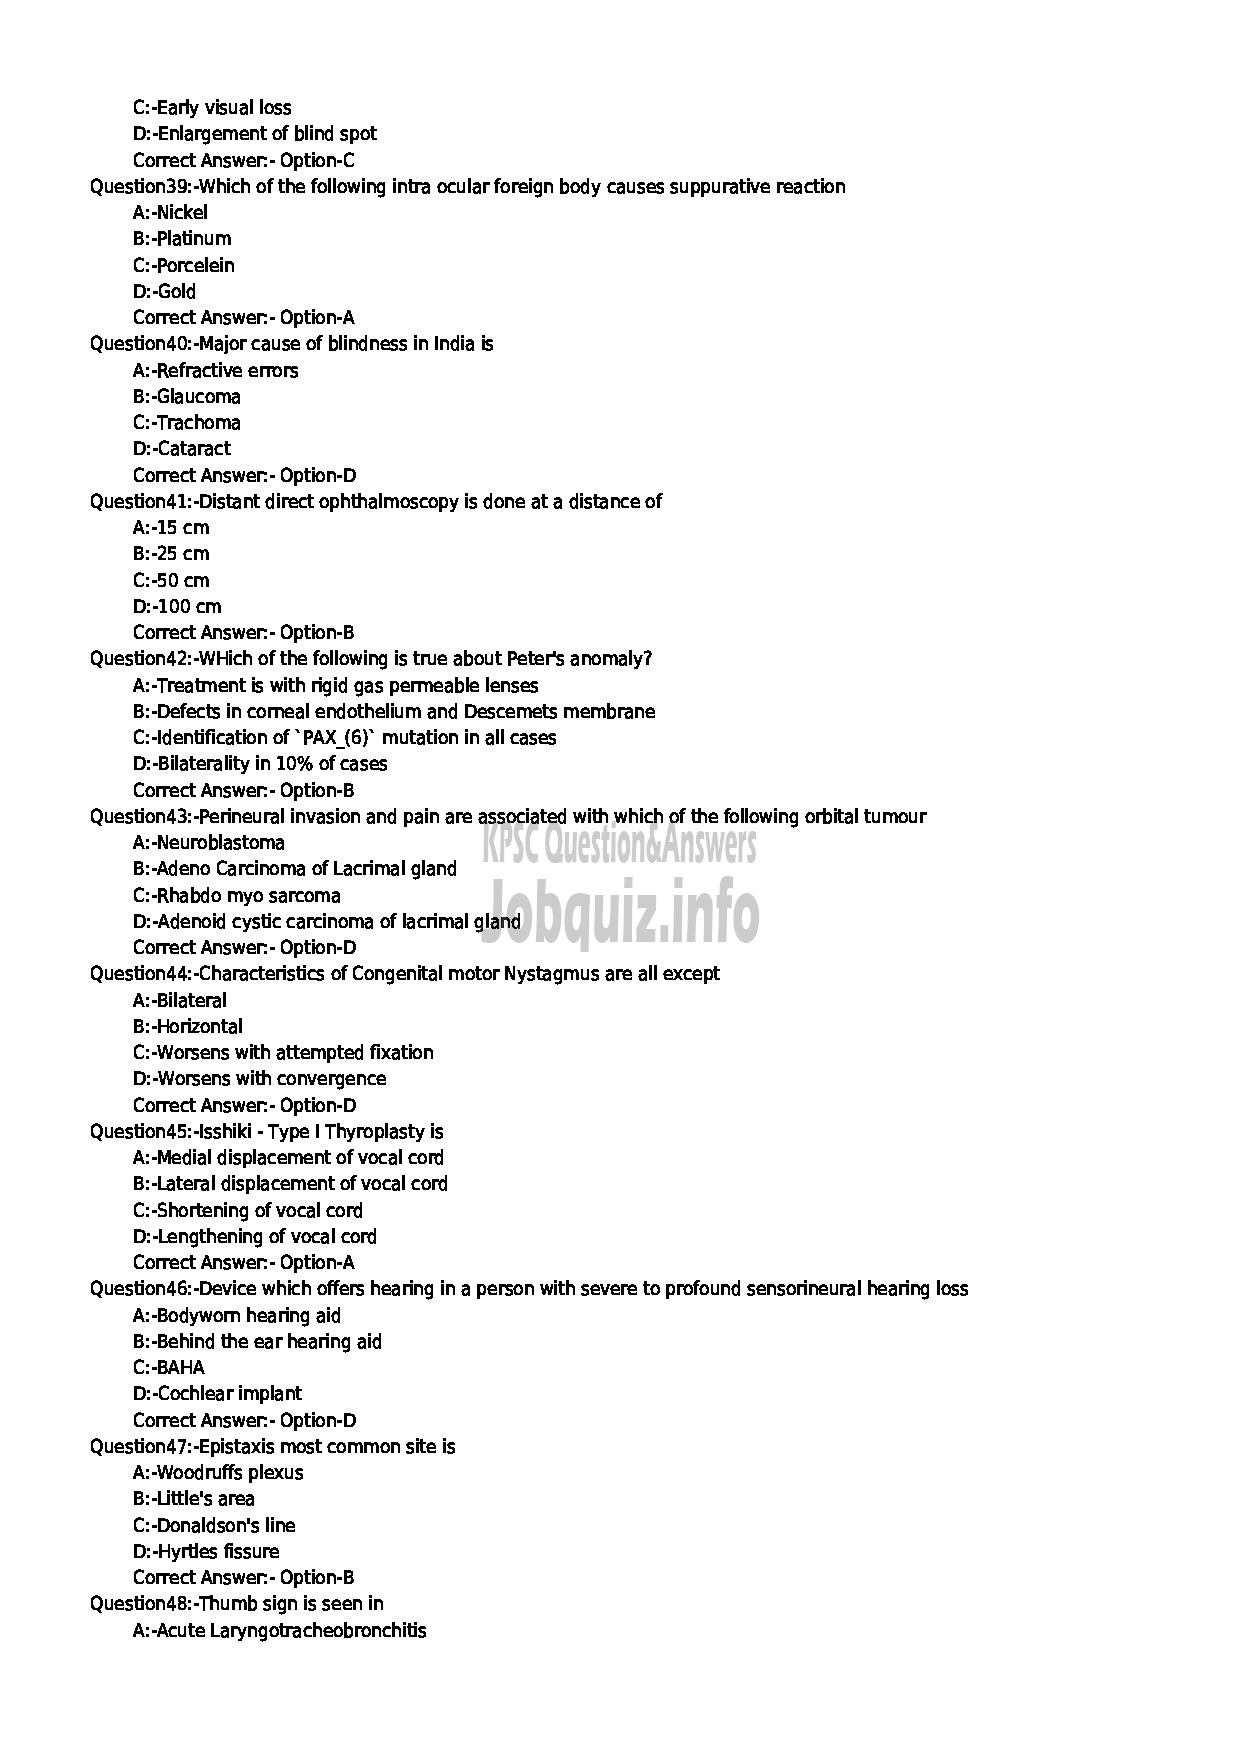 Kerala PSC Question Paper - Assistant Surgeon / casuality Medicine NCA Medical Education-5